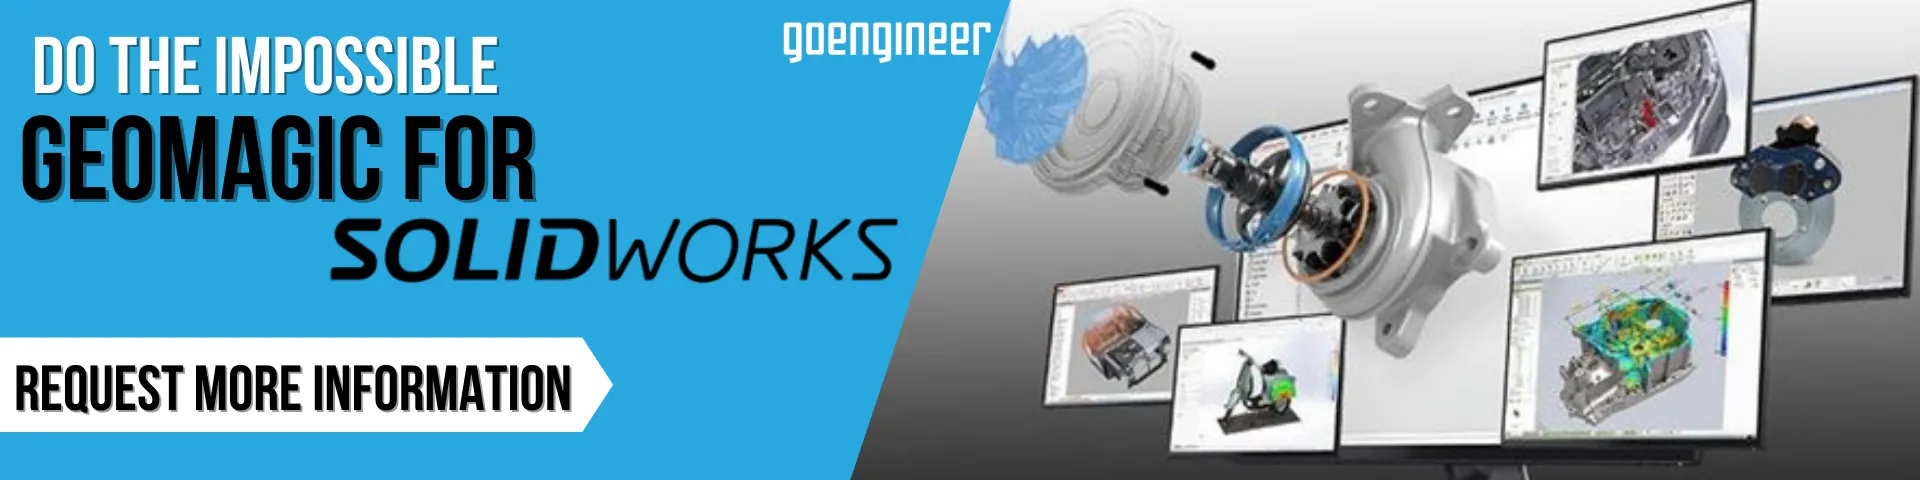 Geomagic for SOLIDWORKS Request More Information from GoEngineer